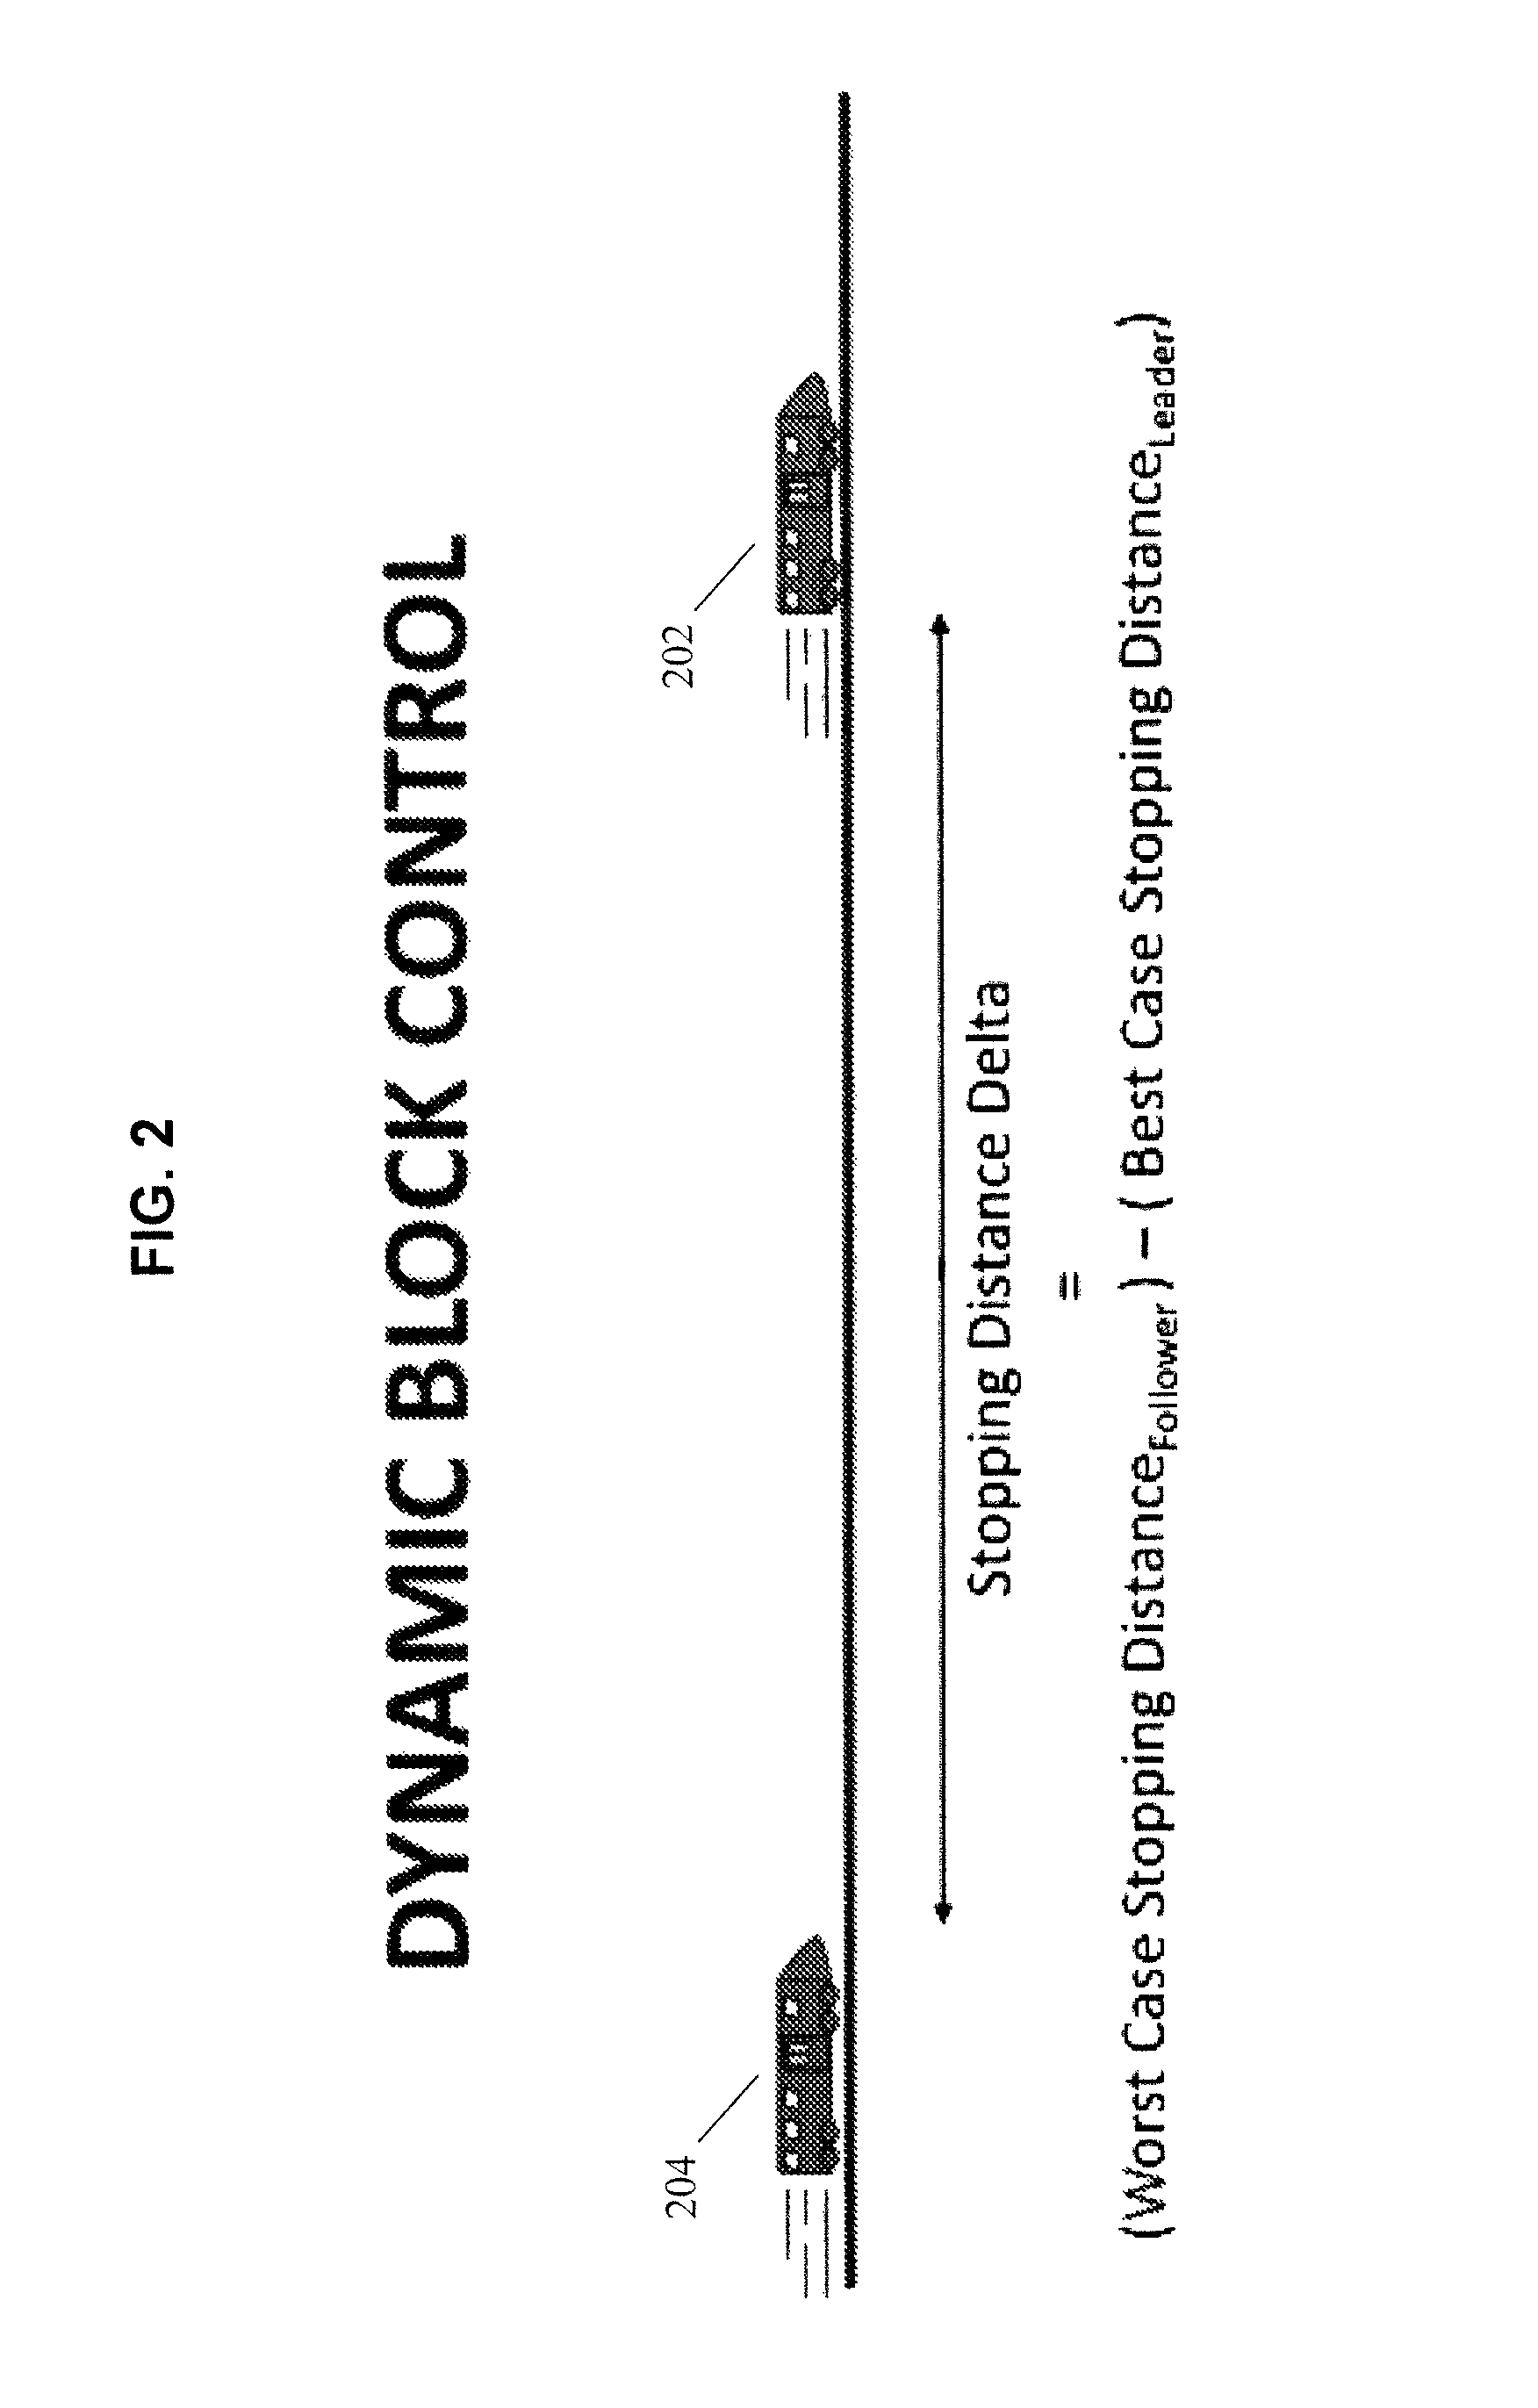 Method and apparatus for controlled braking in fixed guideway transportation systems